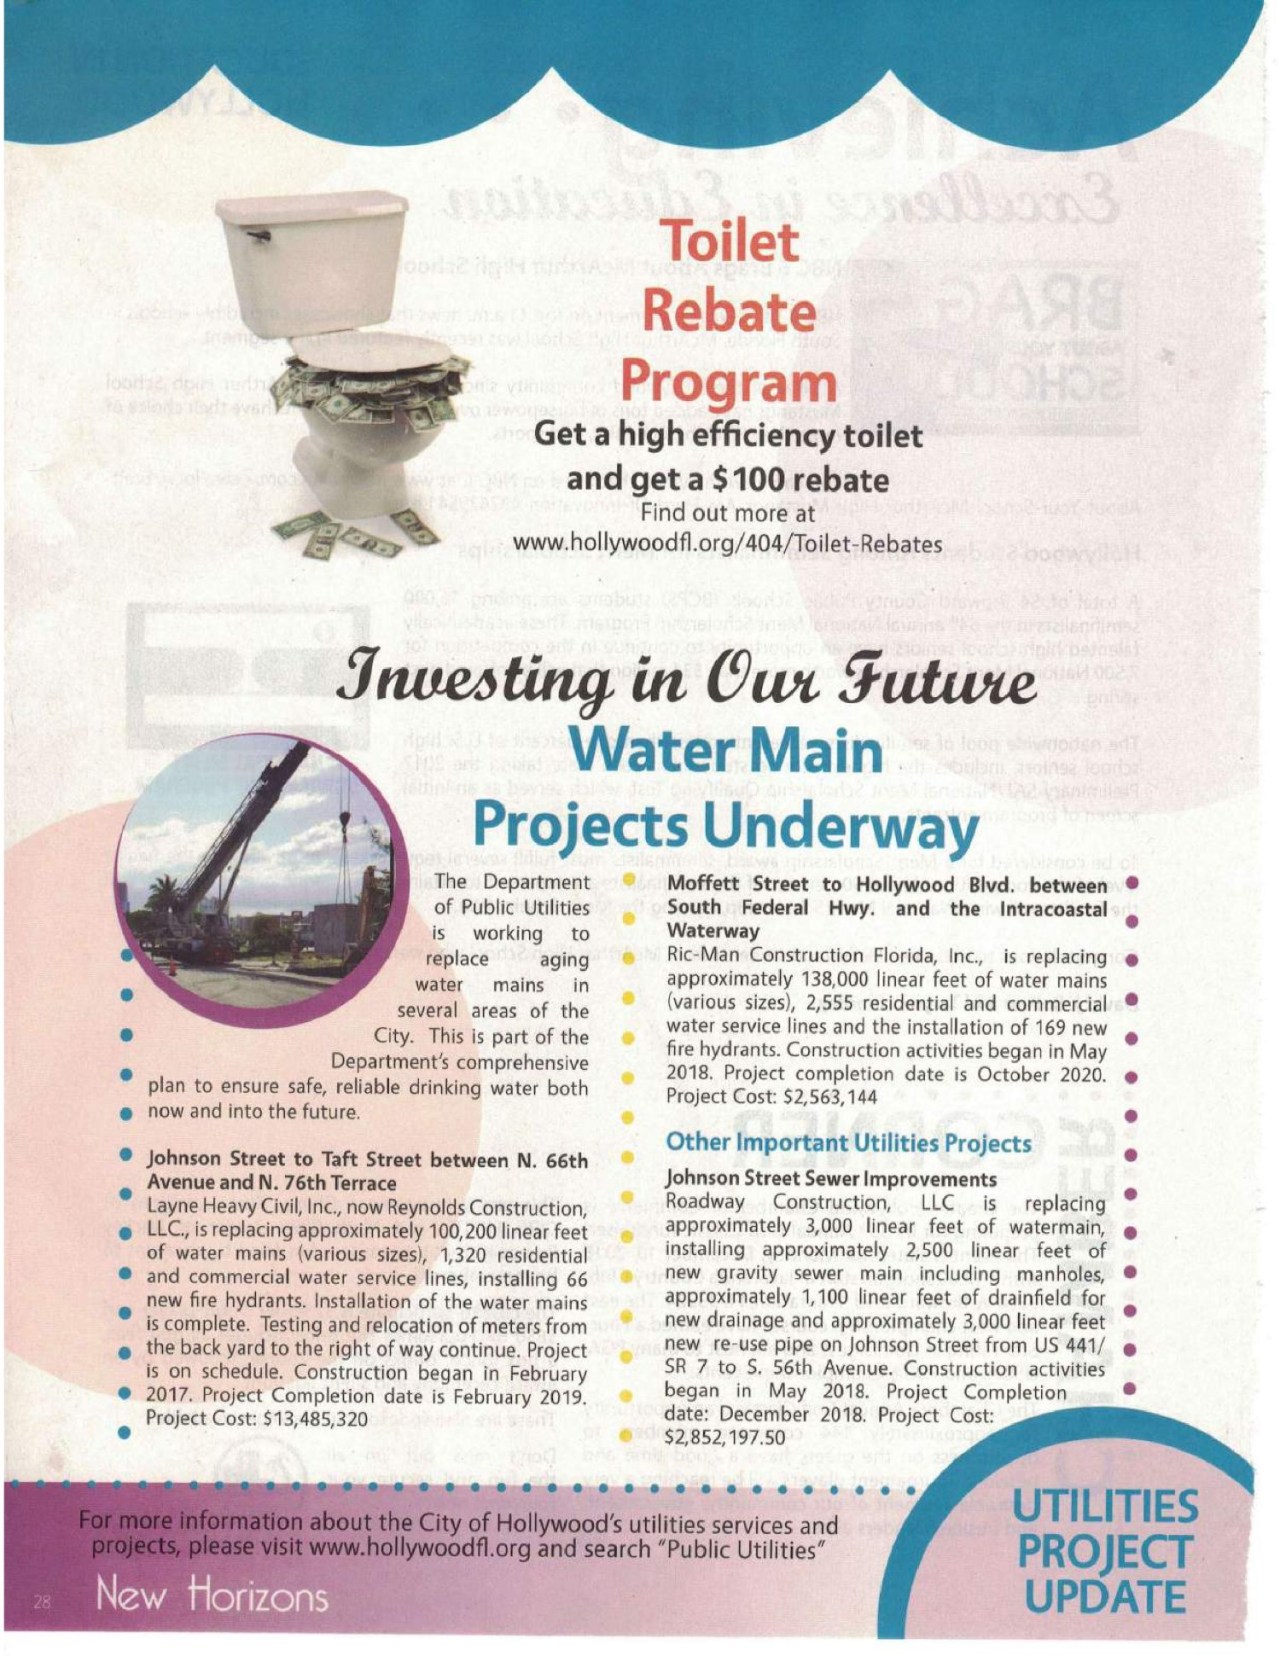 change-your-toilet-city-of-hollywood-gives-a-100-rebate-aquarius